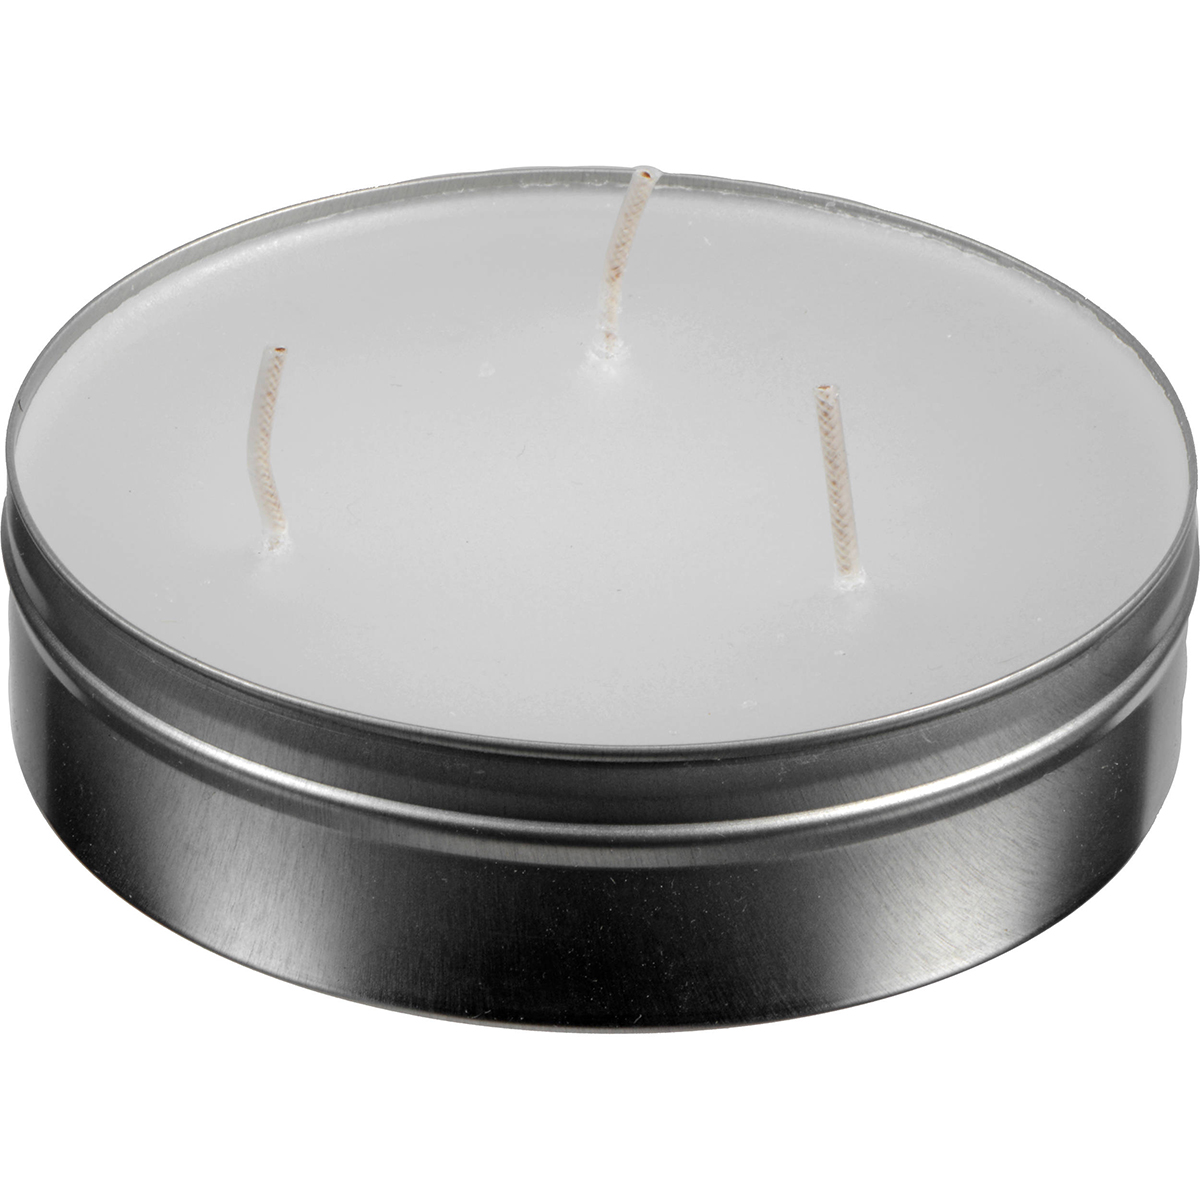 Coghlans Emergency Survival Candle 36 Hour - image 1 of 3